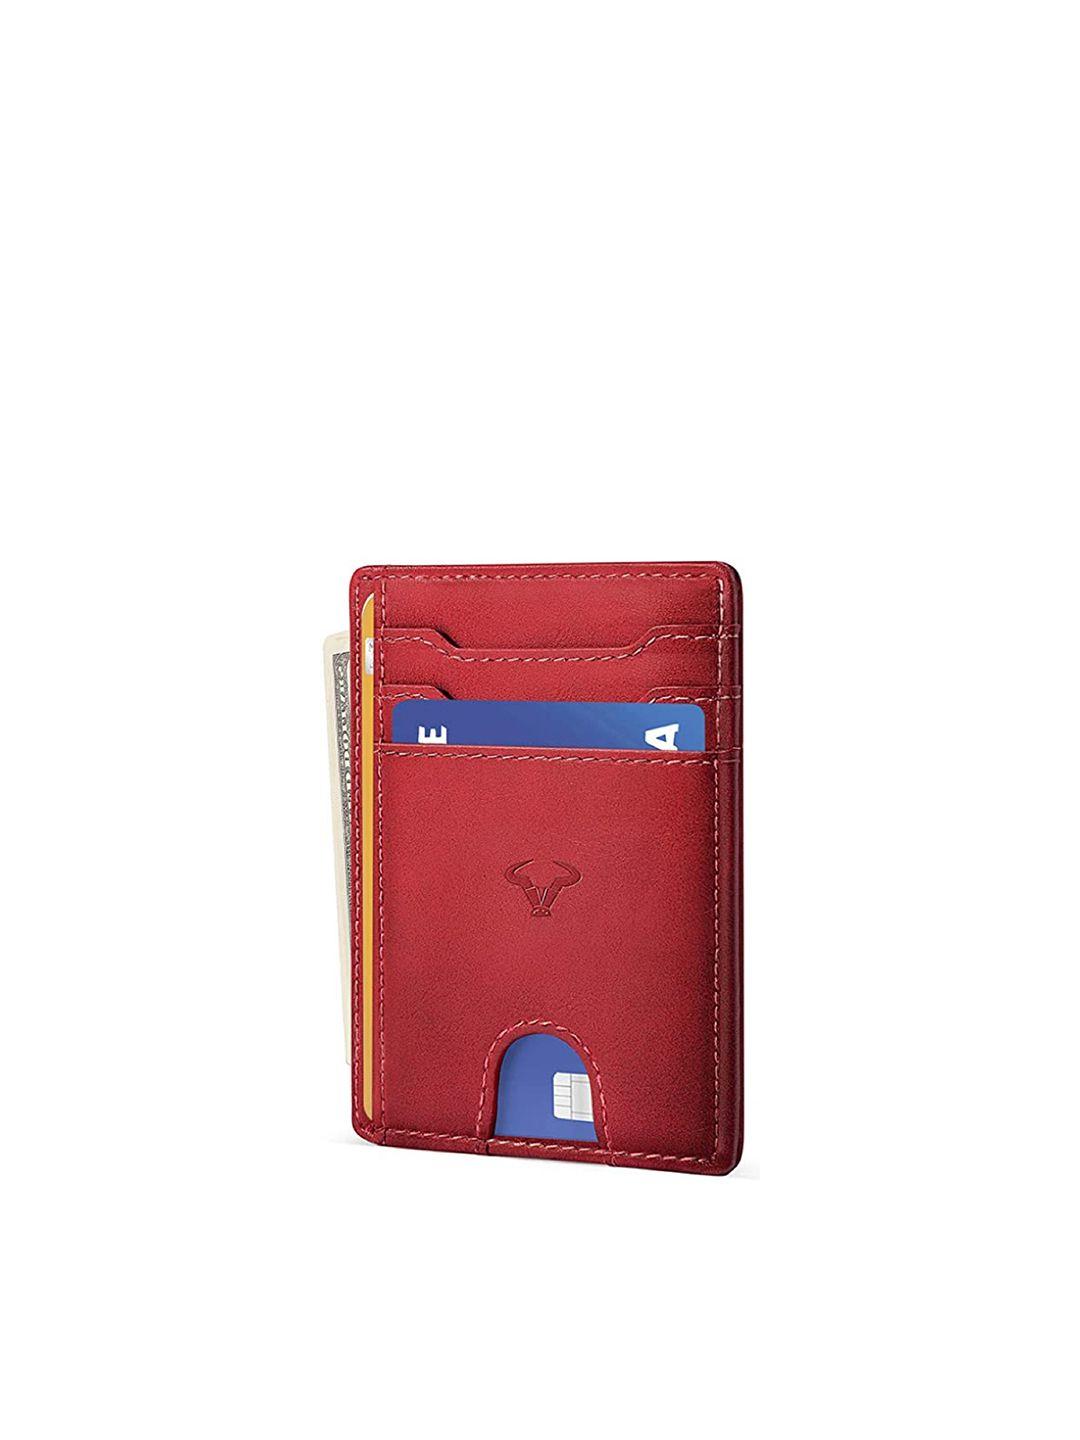 contacts men red leather card holder